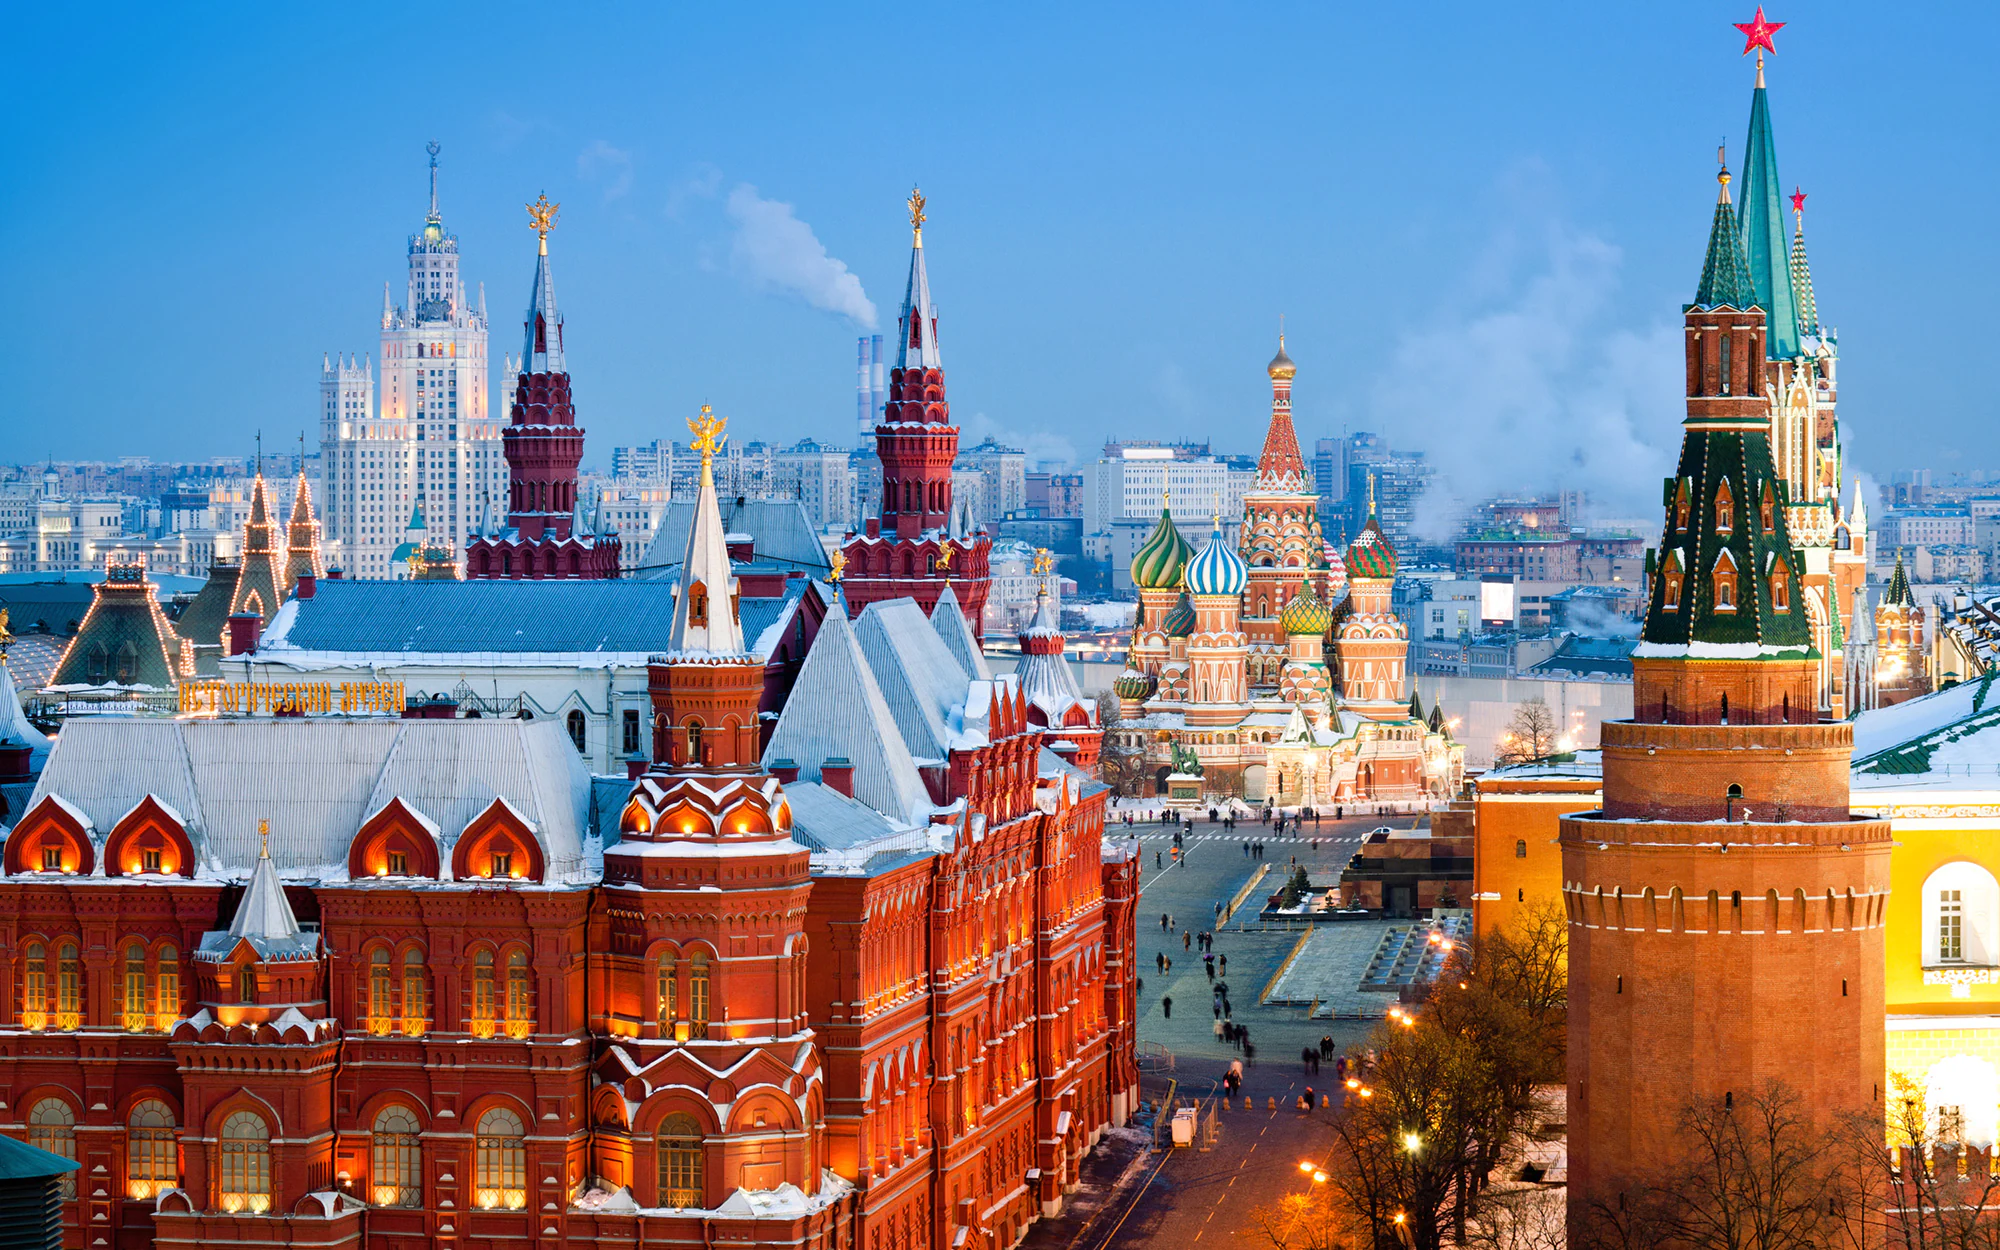 What is the name of the main street in Moscow?